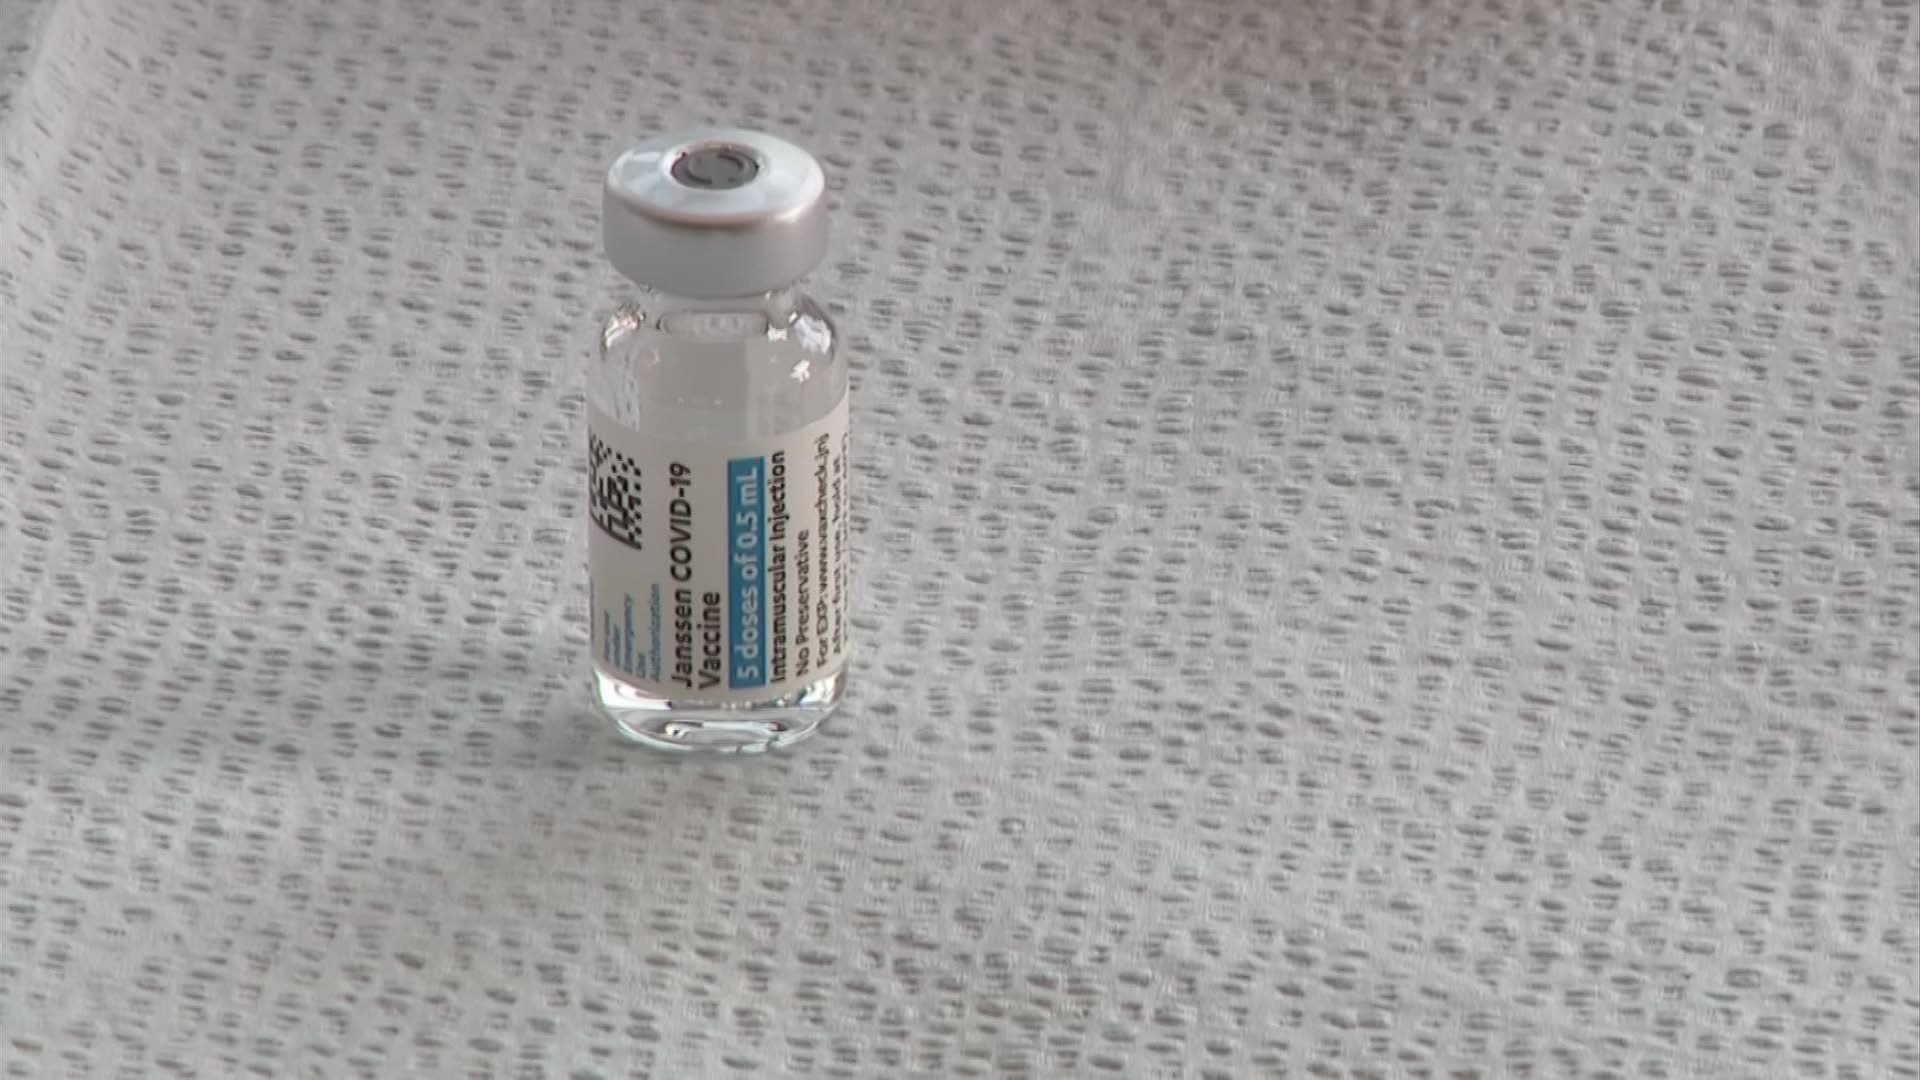 Getting your COVID-19 vaccine is coming with perks these days as Ohio tries to up its vaccination rate.